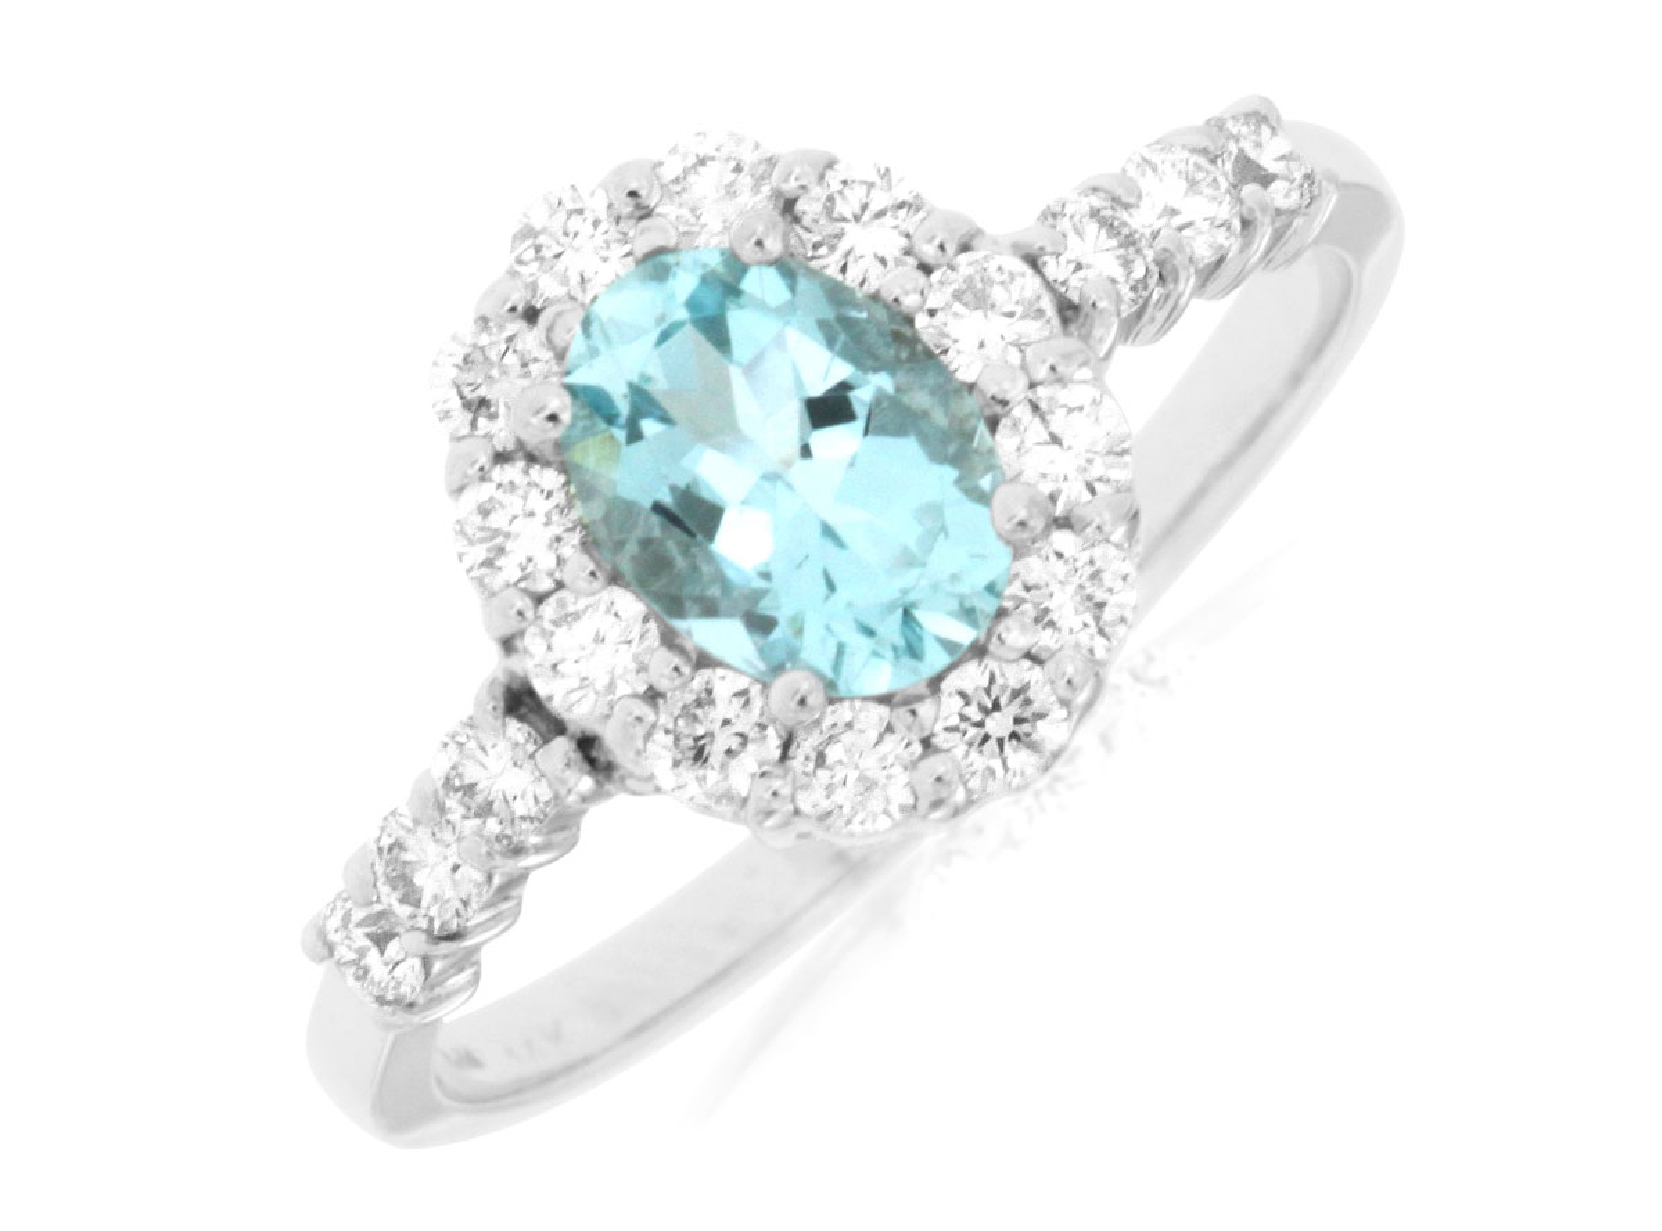 14K White Gold Oval Aquamarine Ring with Diamond Halo and Diamond Accents on the Band

Size 6.5
0.65cttw Aquamarine
0.47cttw Diamonds